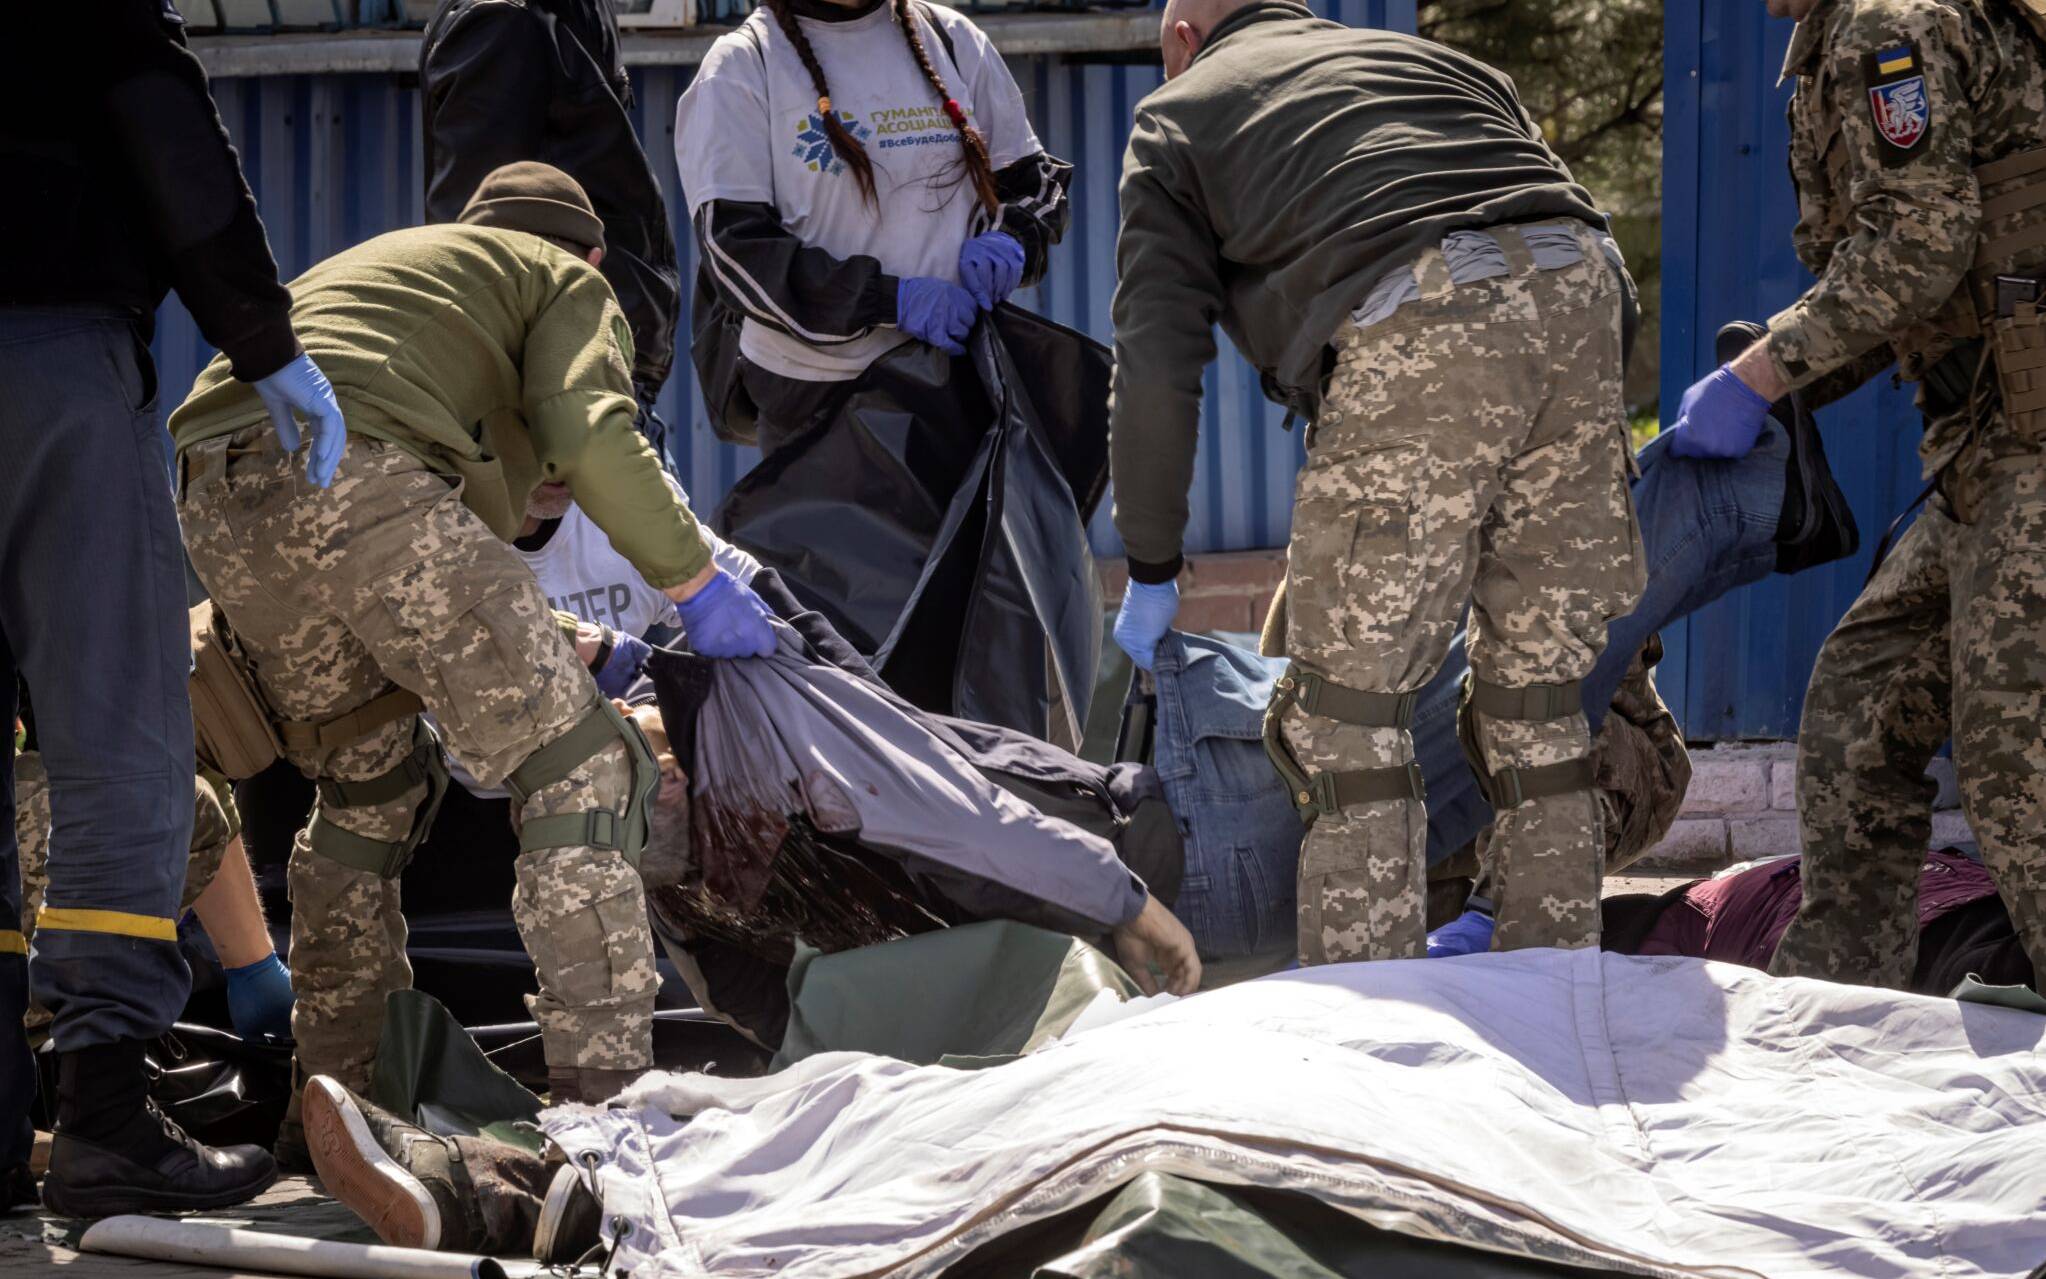 EDITORS NOTE: Graphic content / Ukrainian soldiers clear out bodies after a rocket attack killed at least 35 people on April 8, 2022 at a train station in Kramatorsk, eastern Ukraine, that was being used for civilian evacuations. (Photo by FADEL SENNA / AFP)